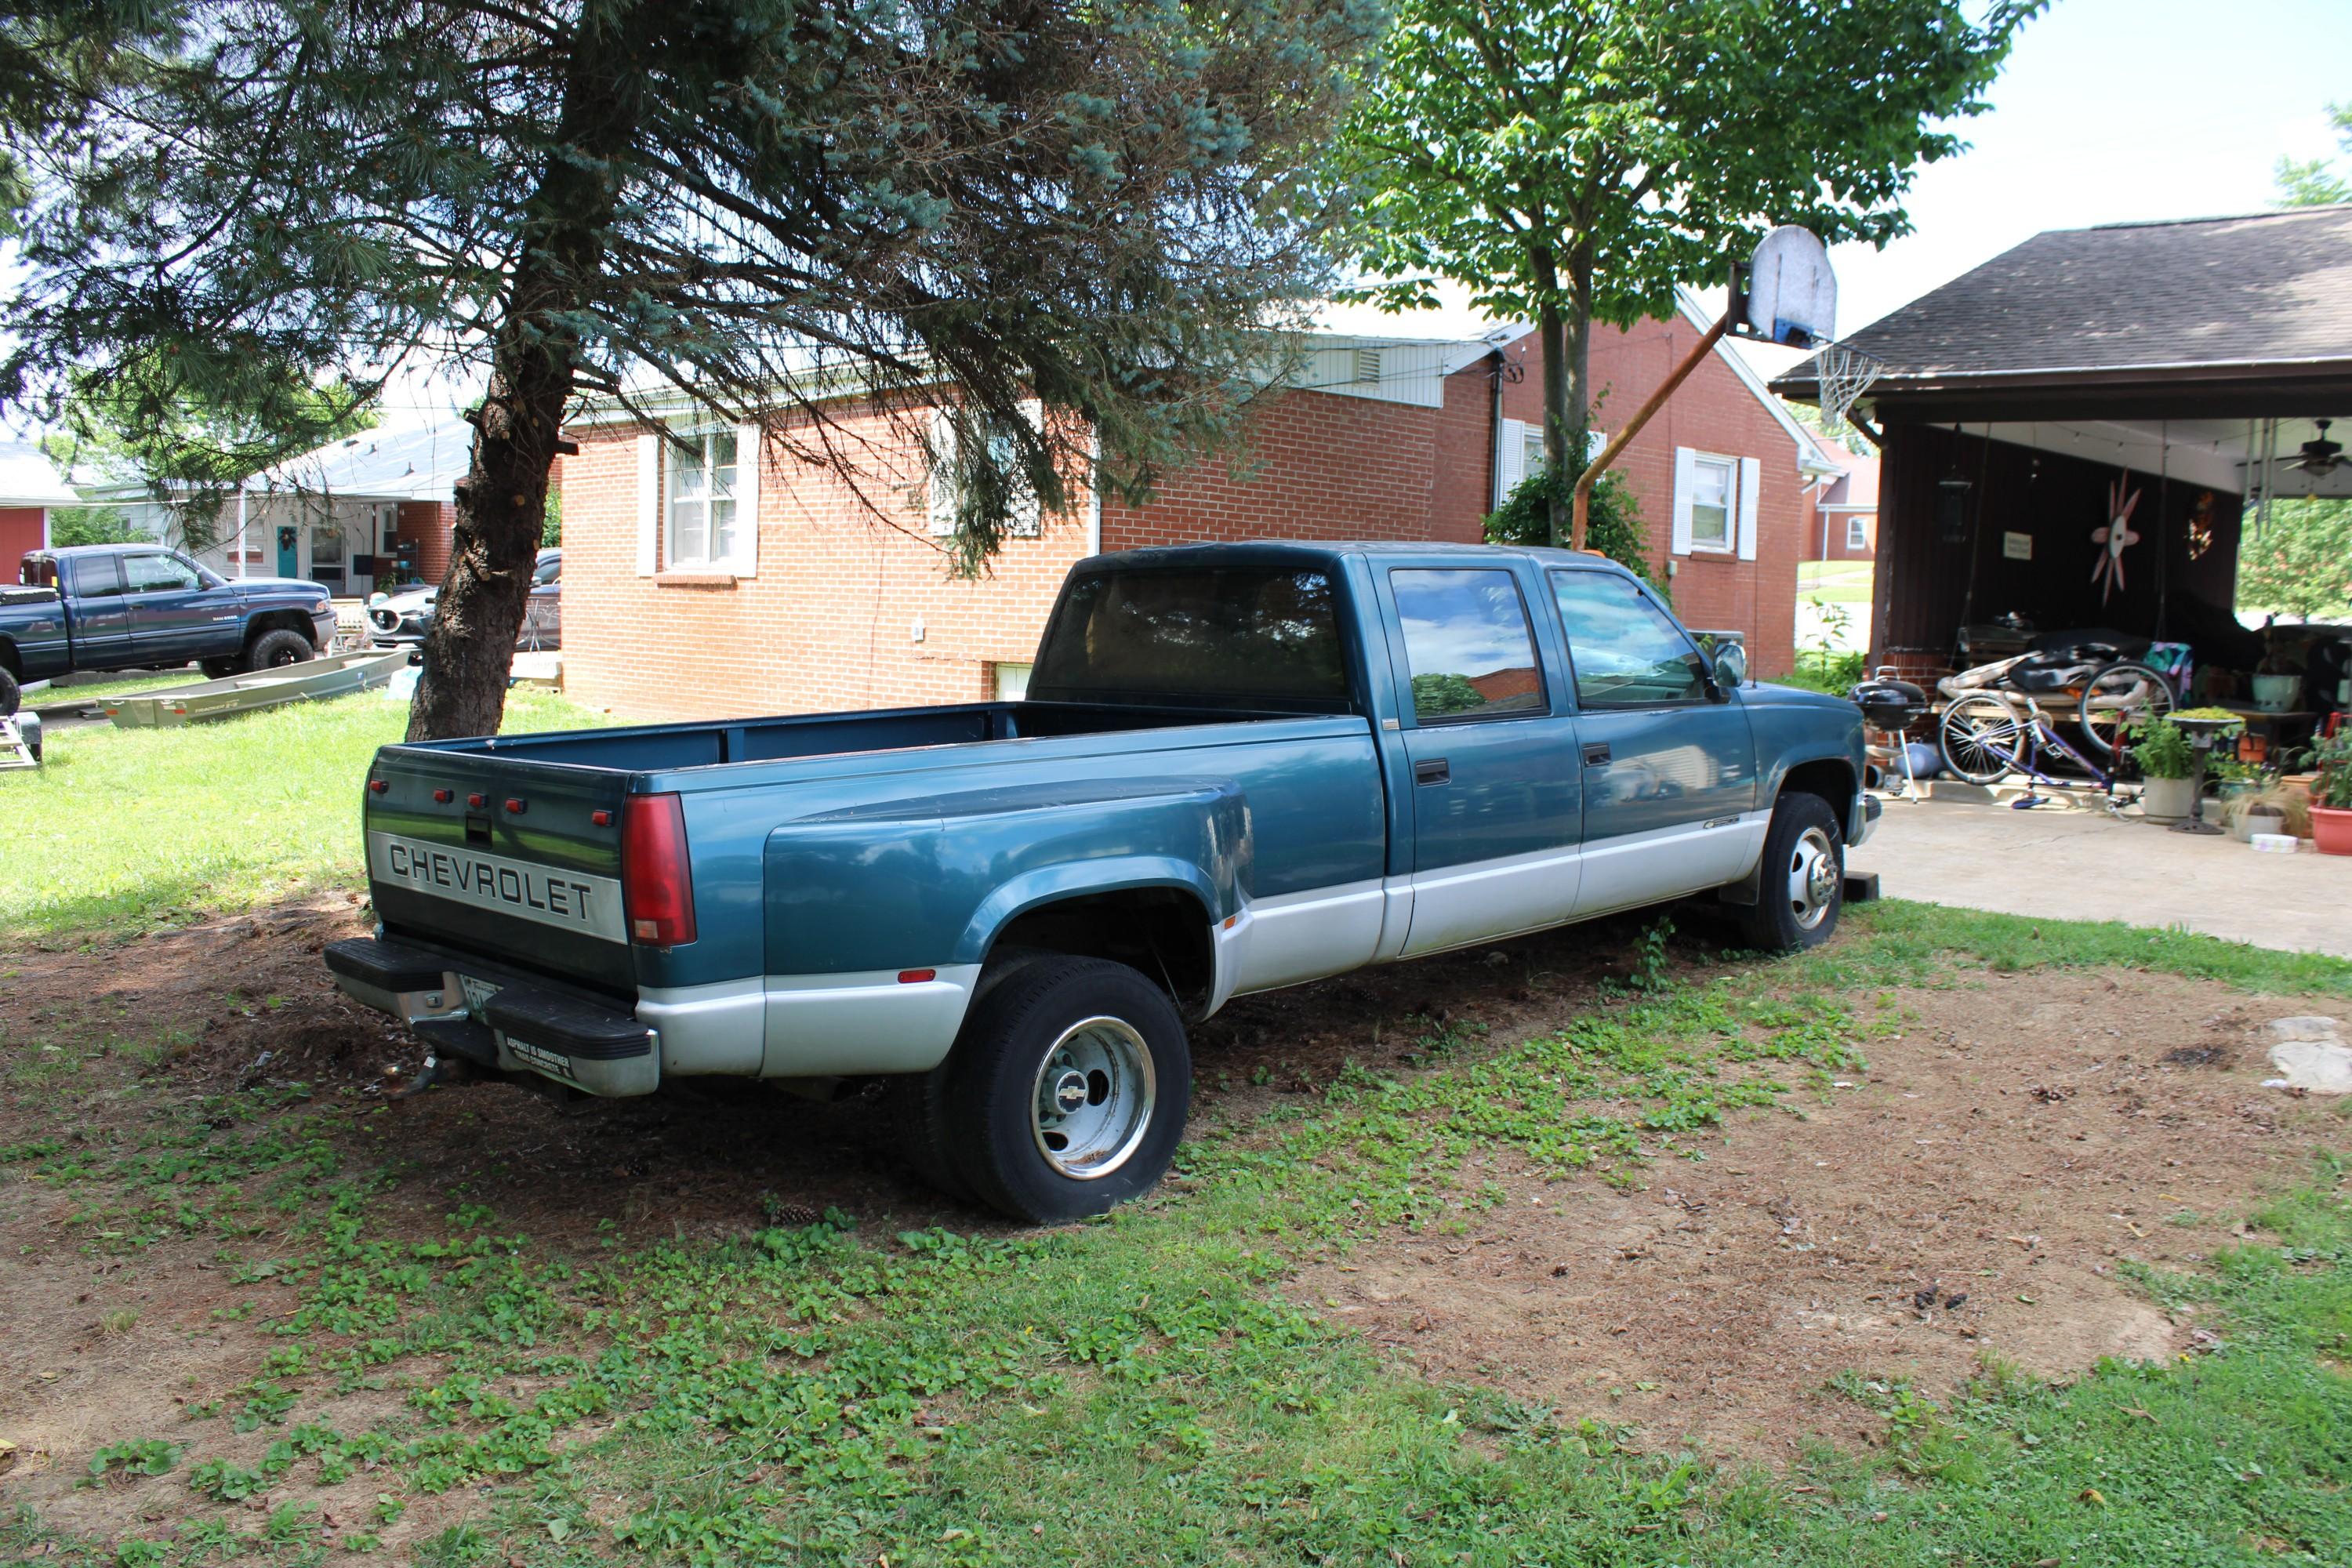 1993 Chevy 3500 Dually, 4 Door Truck, Automatic Trans w/ 114,519 Miles